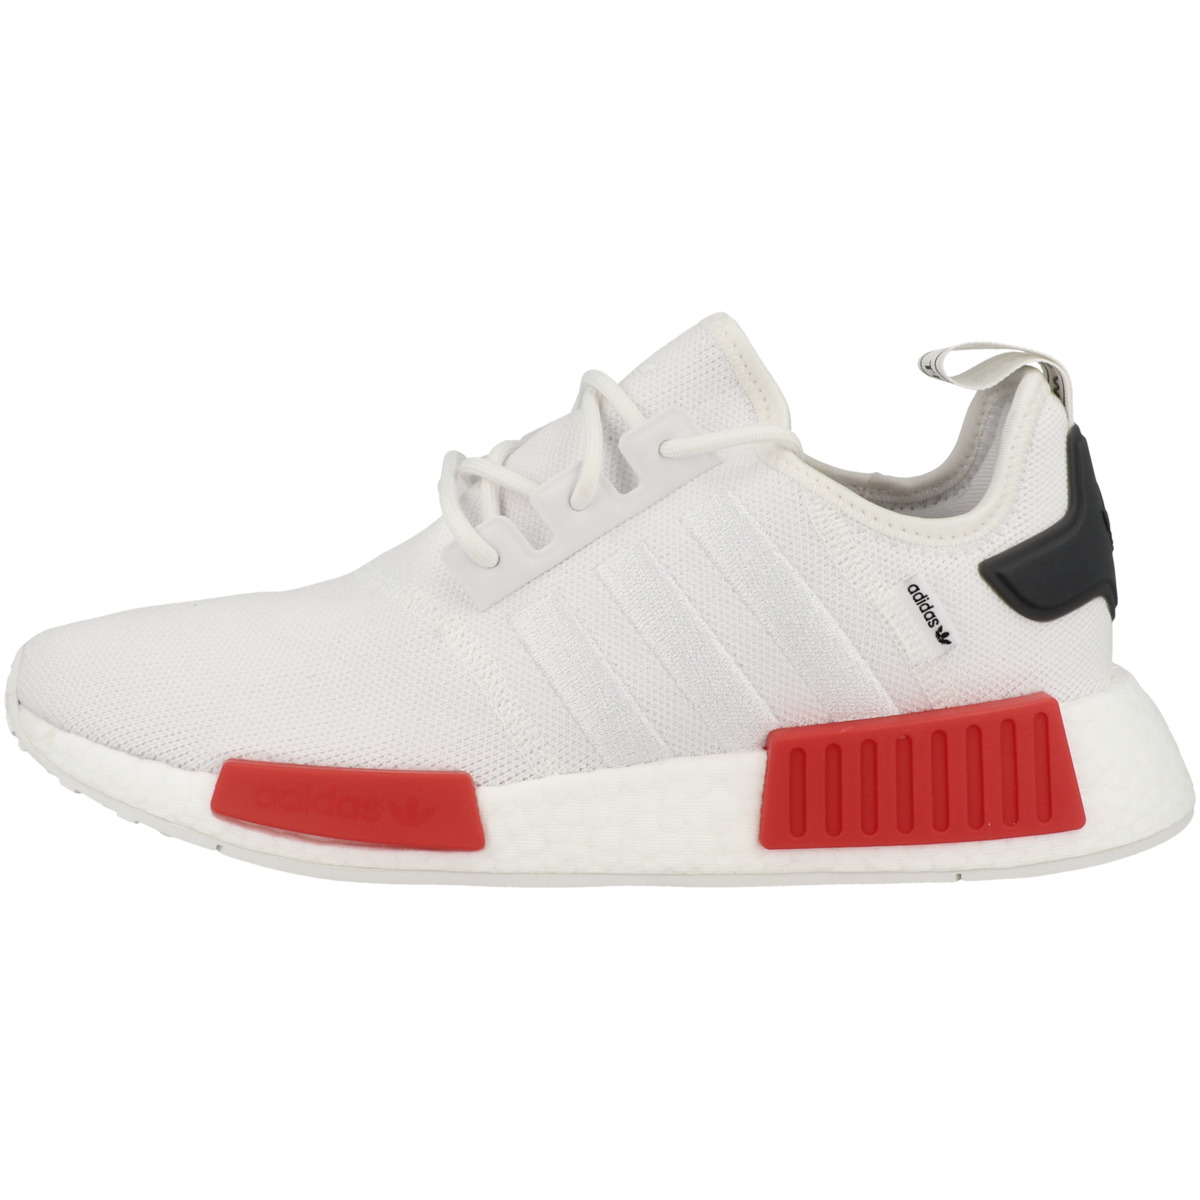 Adidas NMD_R1 Sneaker low weiss